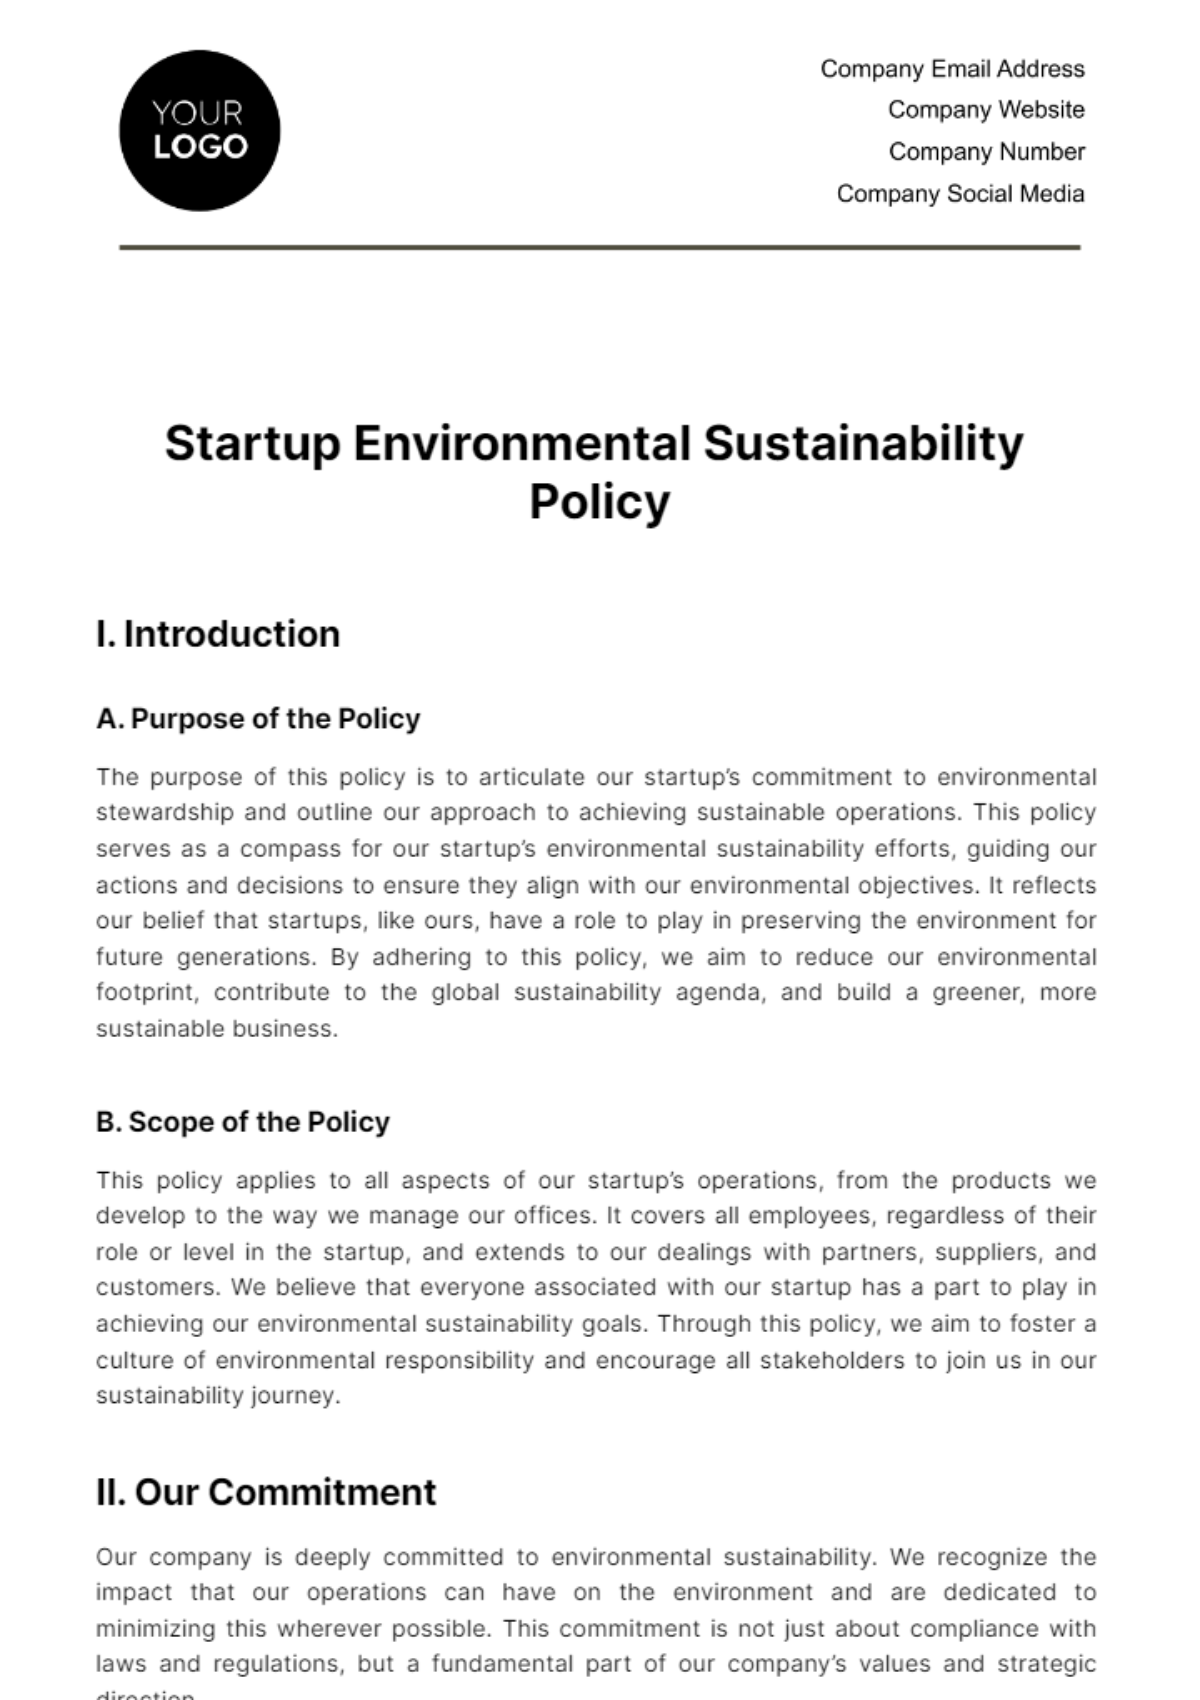 Startup Environmental Sustainability Policy Template